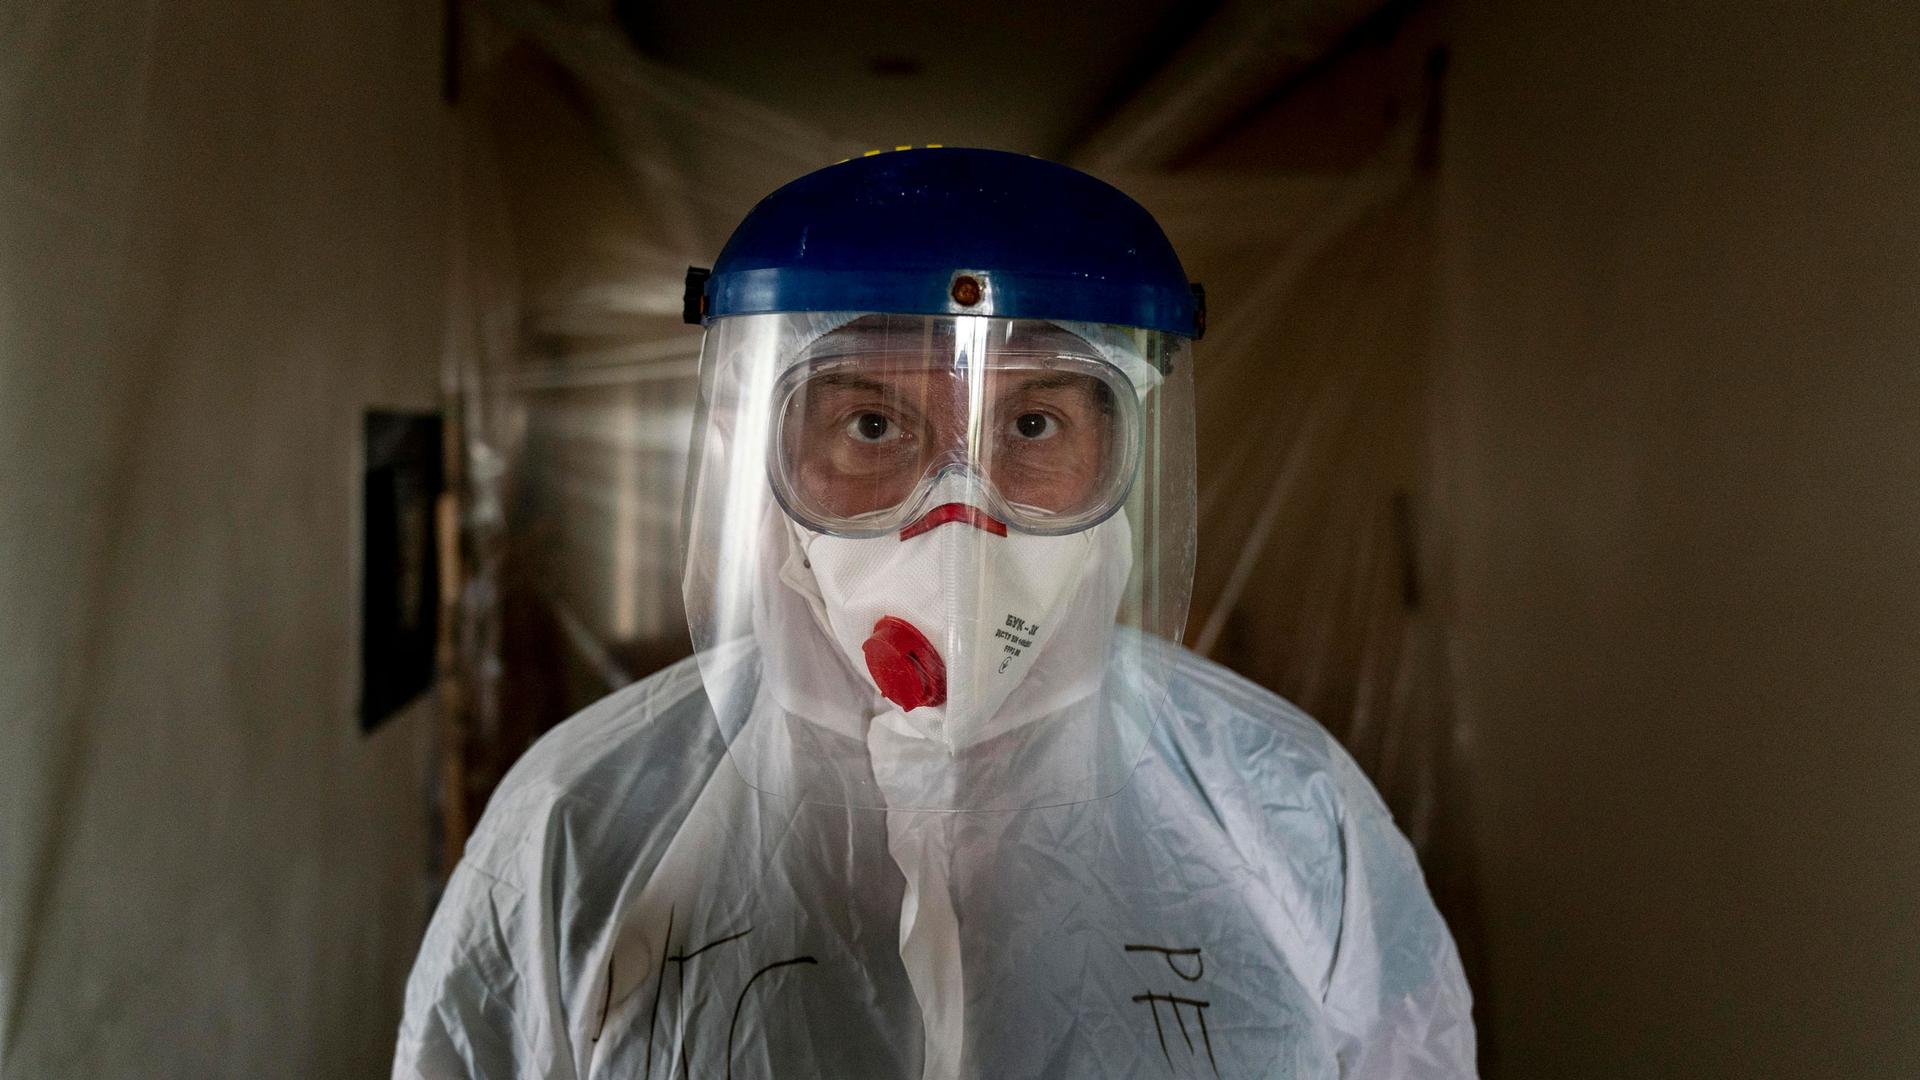 A doctor is shown looking directly into the camera and wearing goggles, a face mask and a face shield.